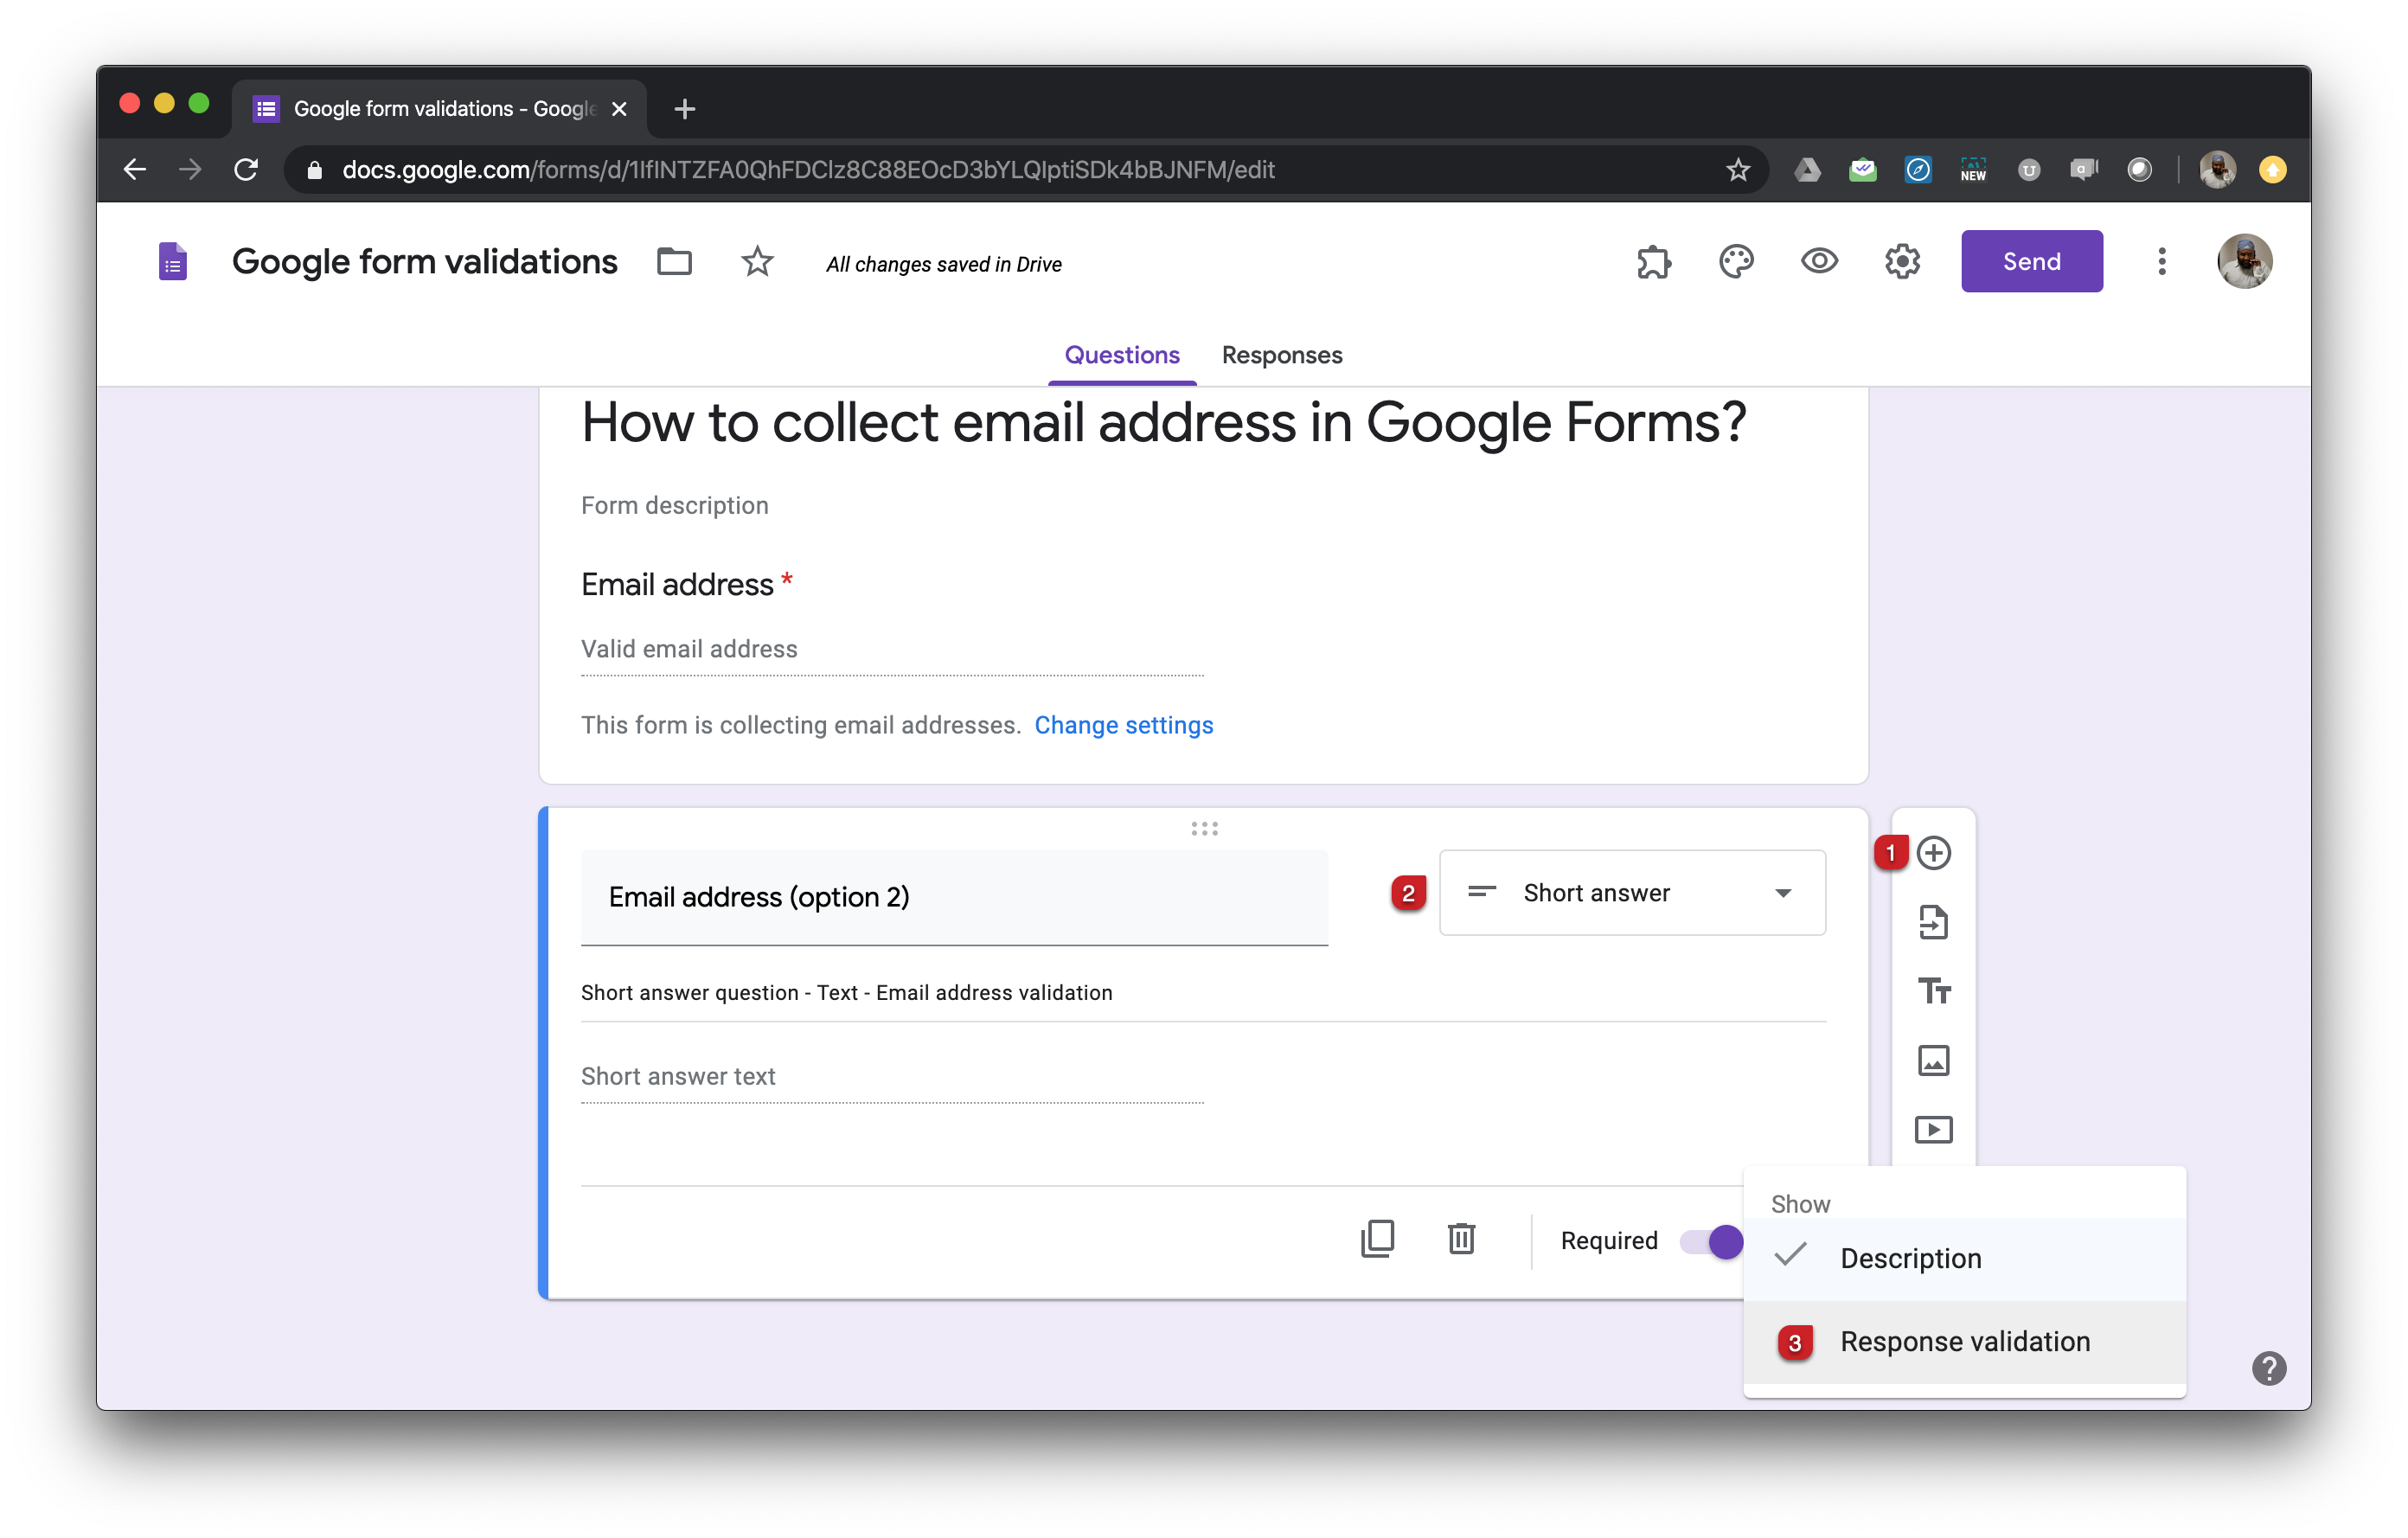 In Google Forms, add a short answer question by clicking on the add question icon as shown below. Then click on the ⋮ icon and select Response validation. 